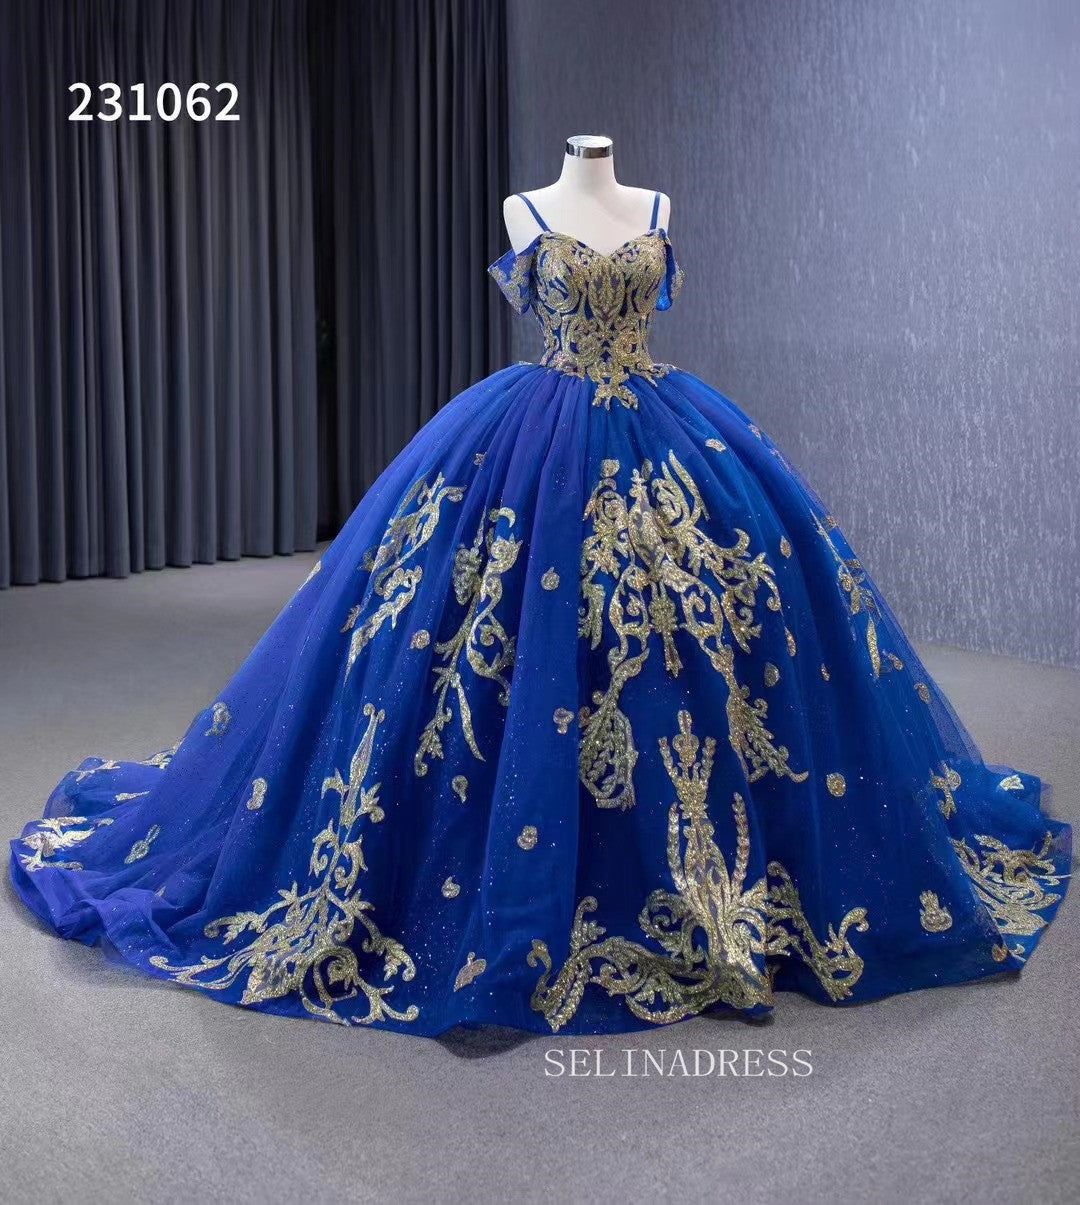 Sparkling Indigo Blue Gold Indigo Quinceanera Dresses With Sequins And  Puffy Princess Design Perfect For Sweet 16, Prom, And Ballgown Parties From  Uniquebridalboutique, $303.43 | DHgate.Com